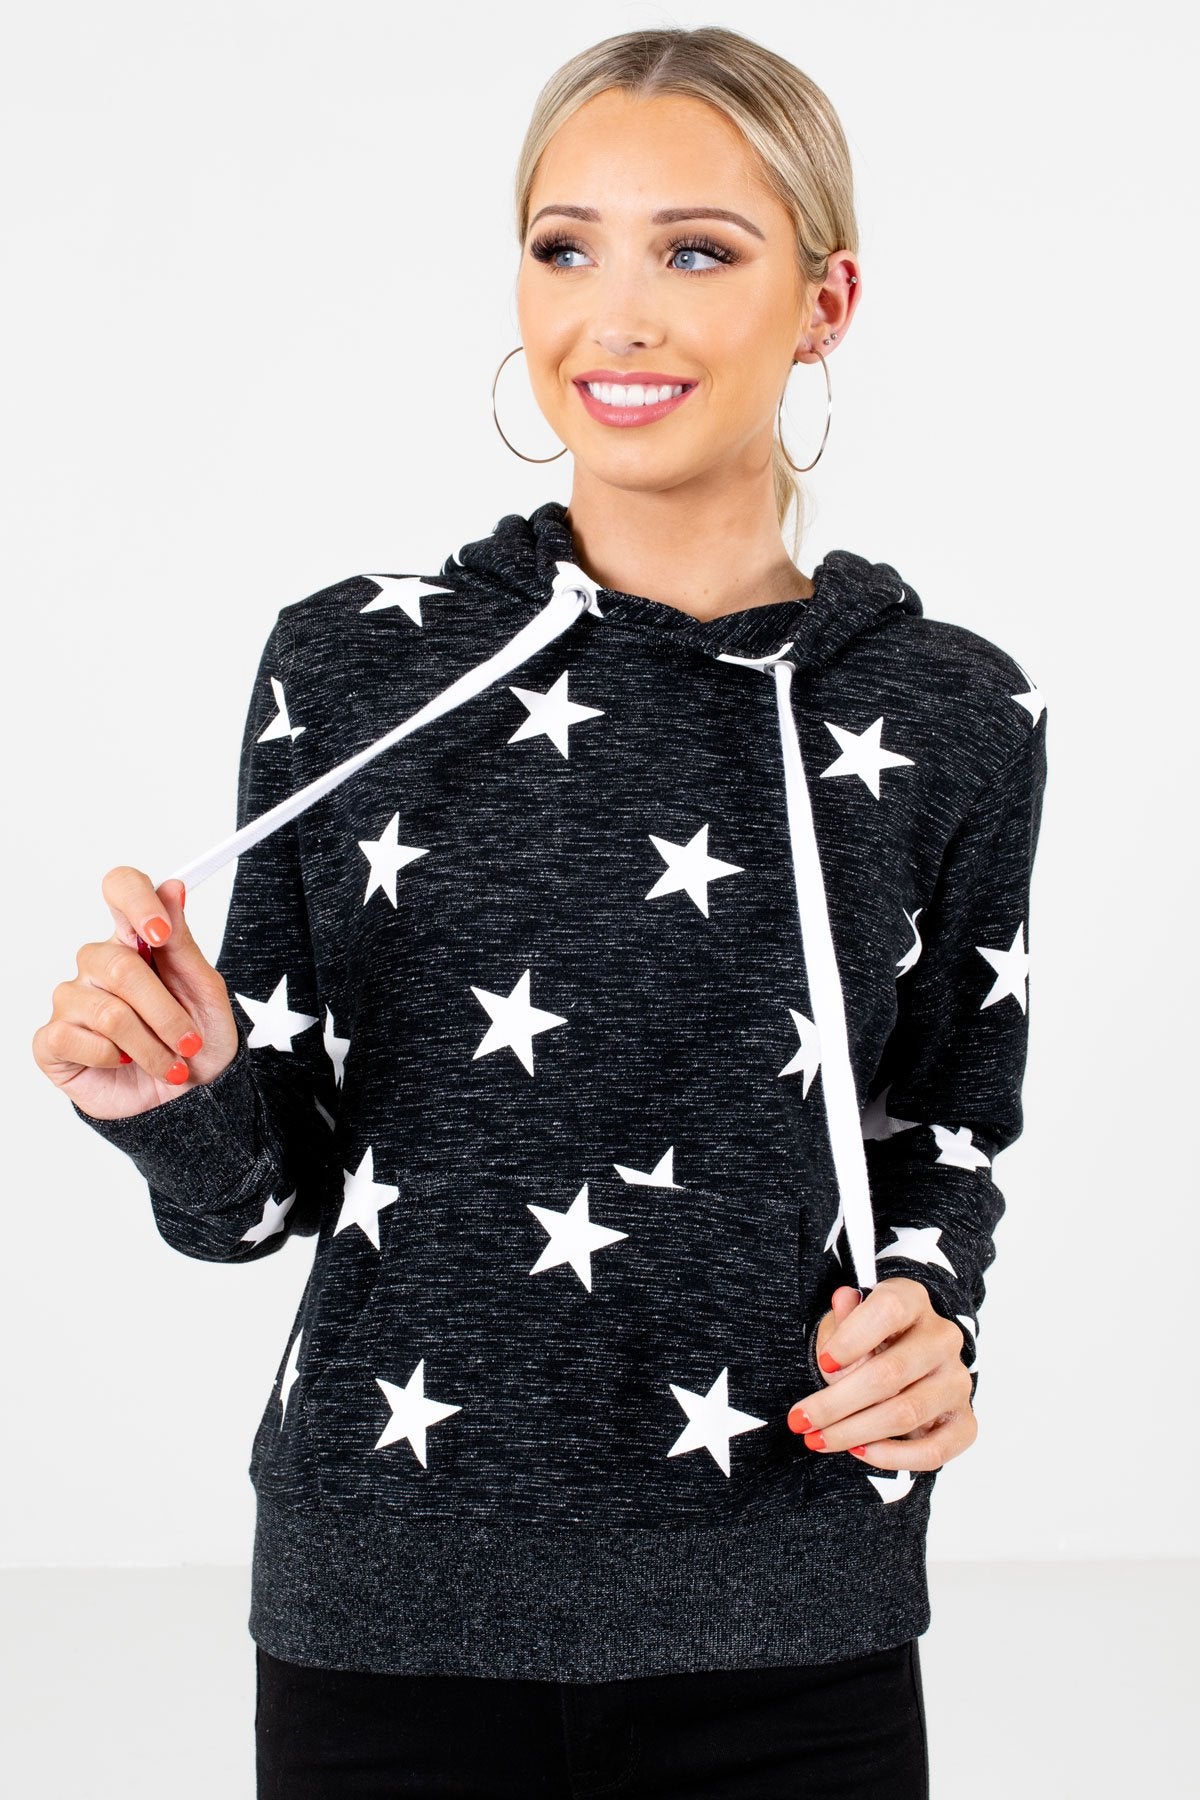 Heather Black and White Star Patterned Boutique Hoodies for Women